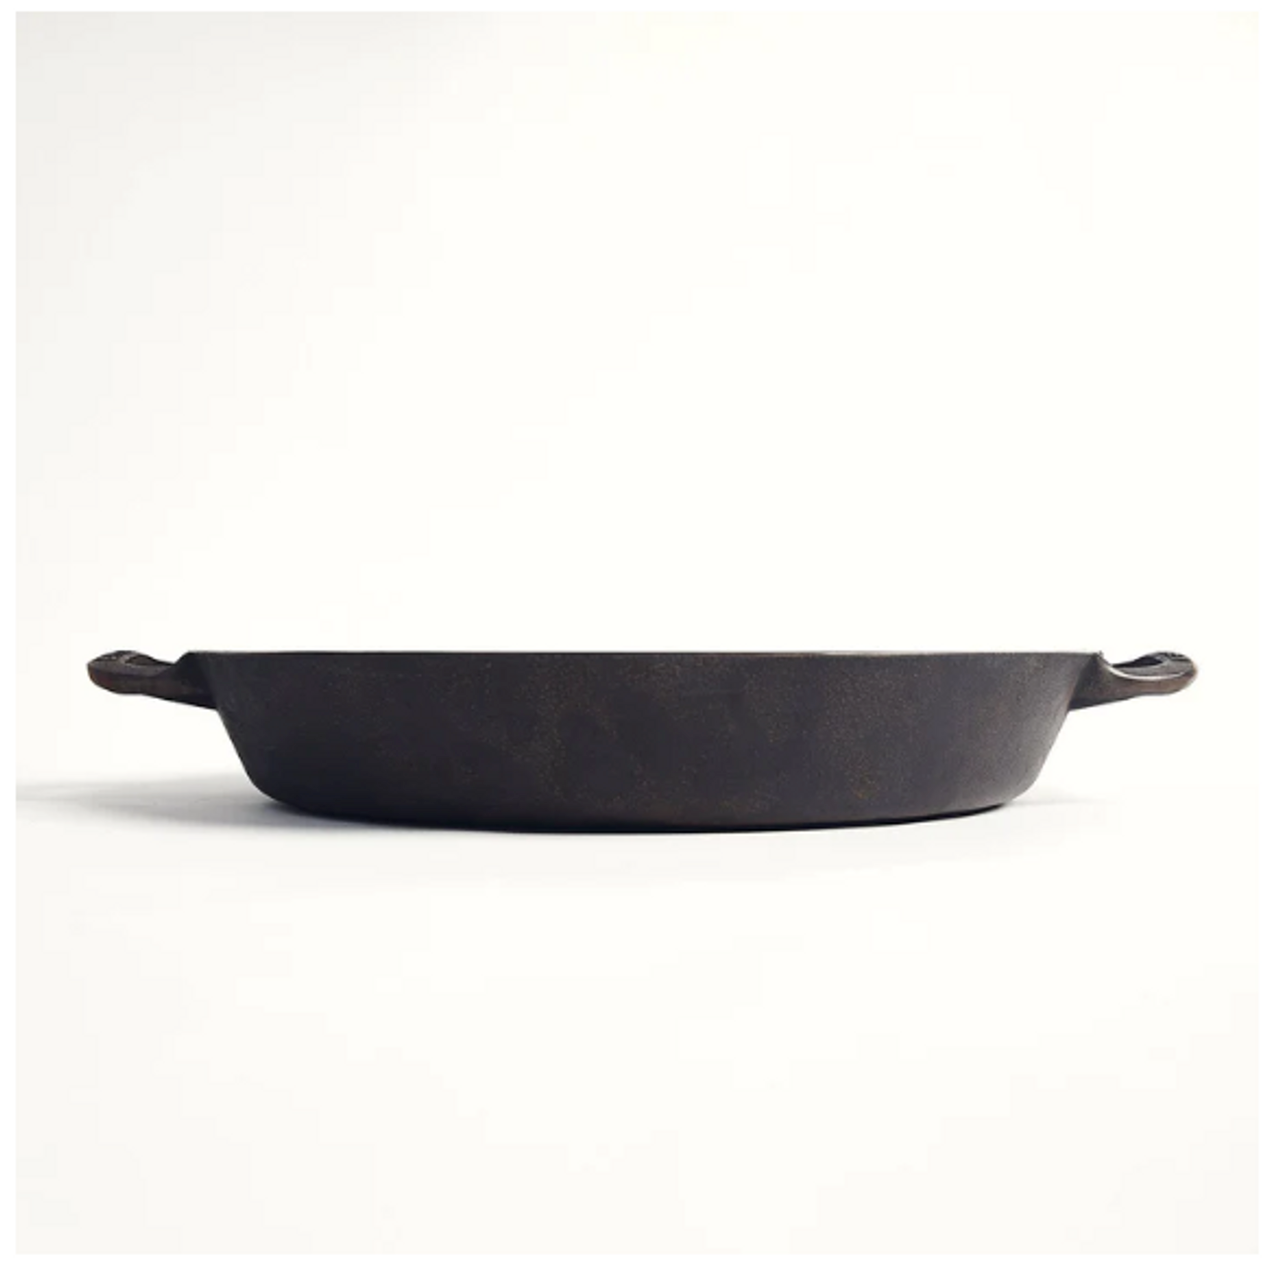 Dual Handle Cast Iron Skillet - 10 inch (7768)